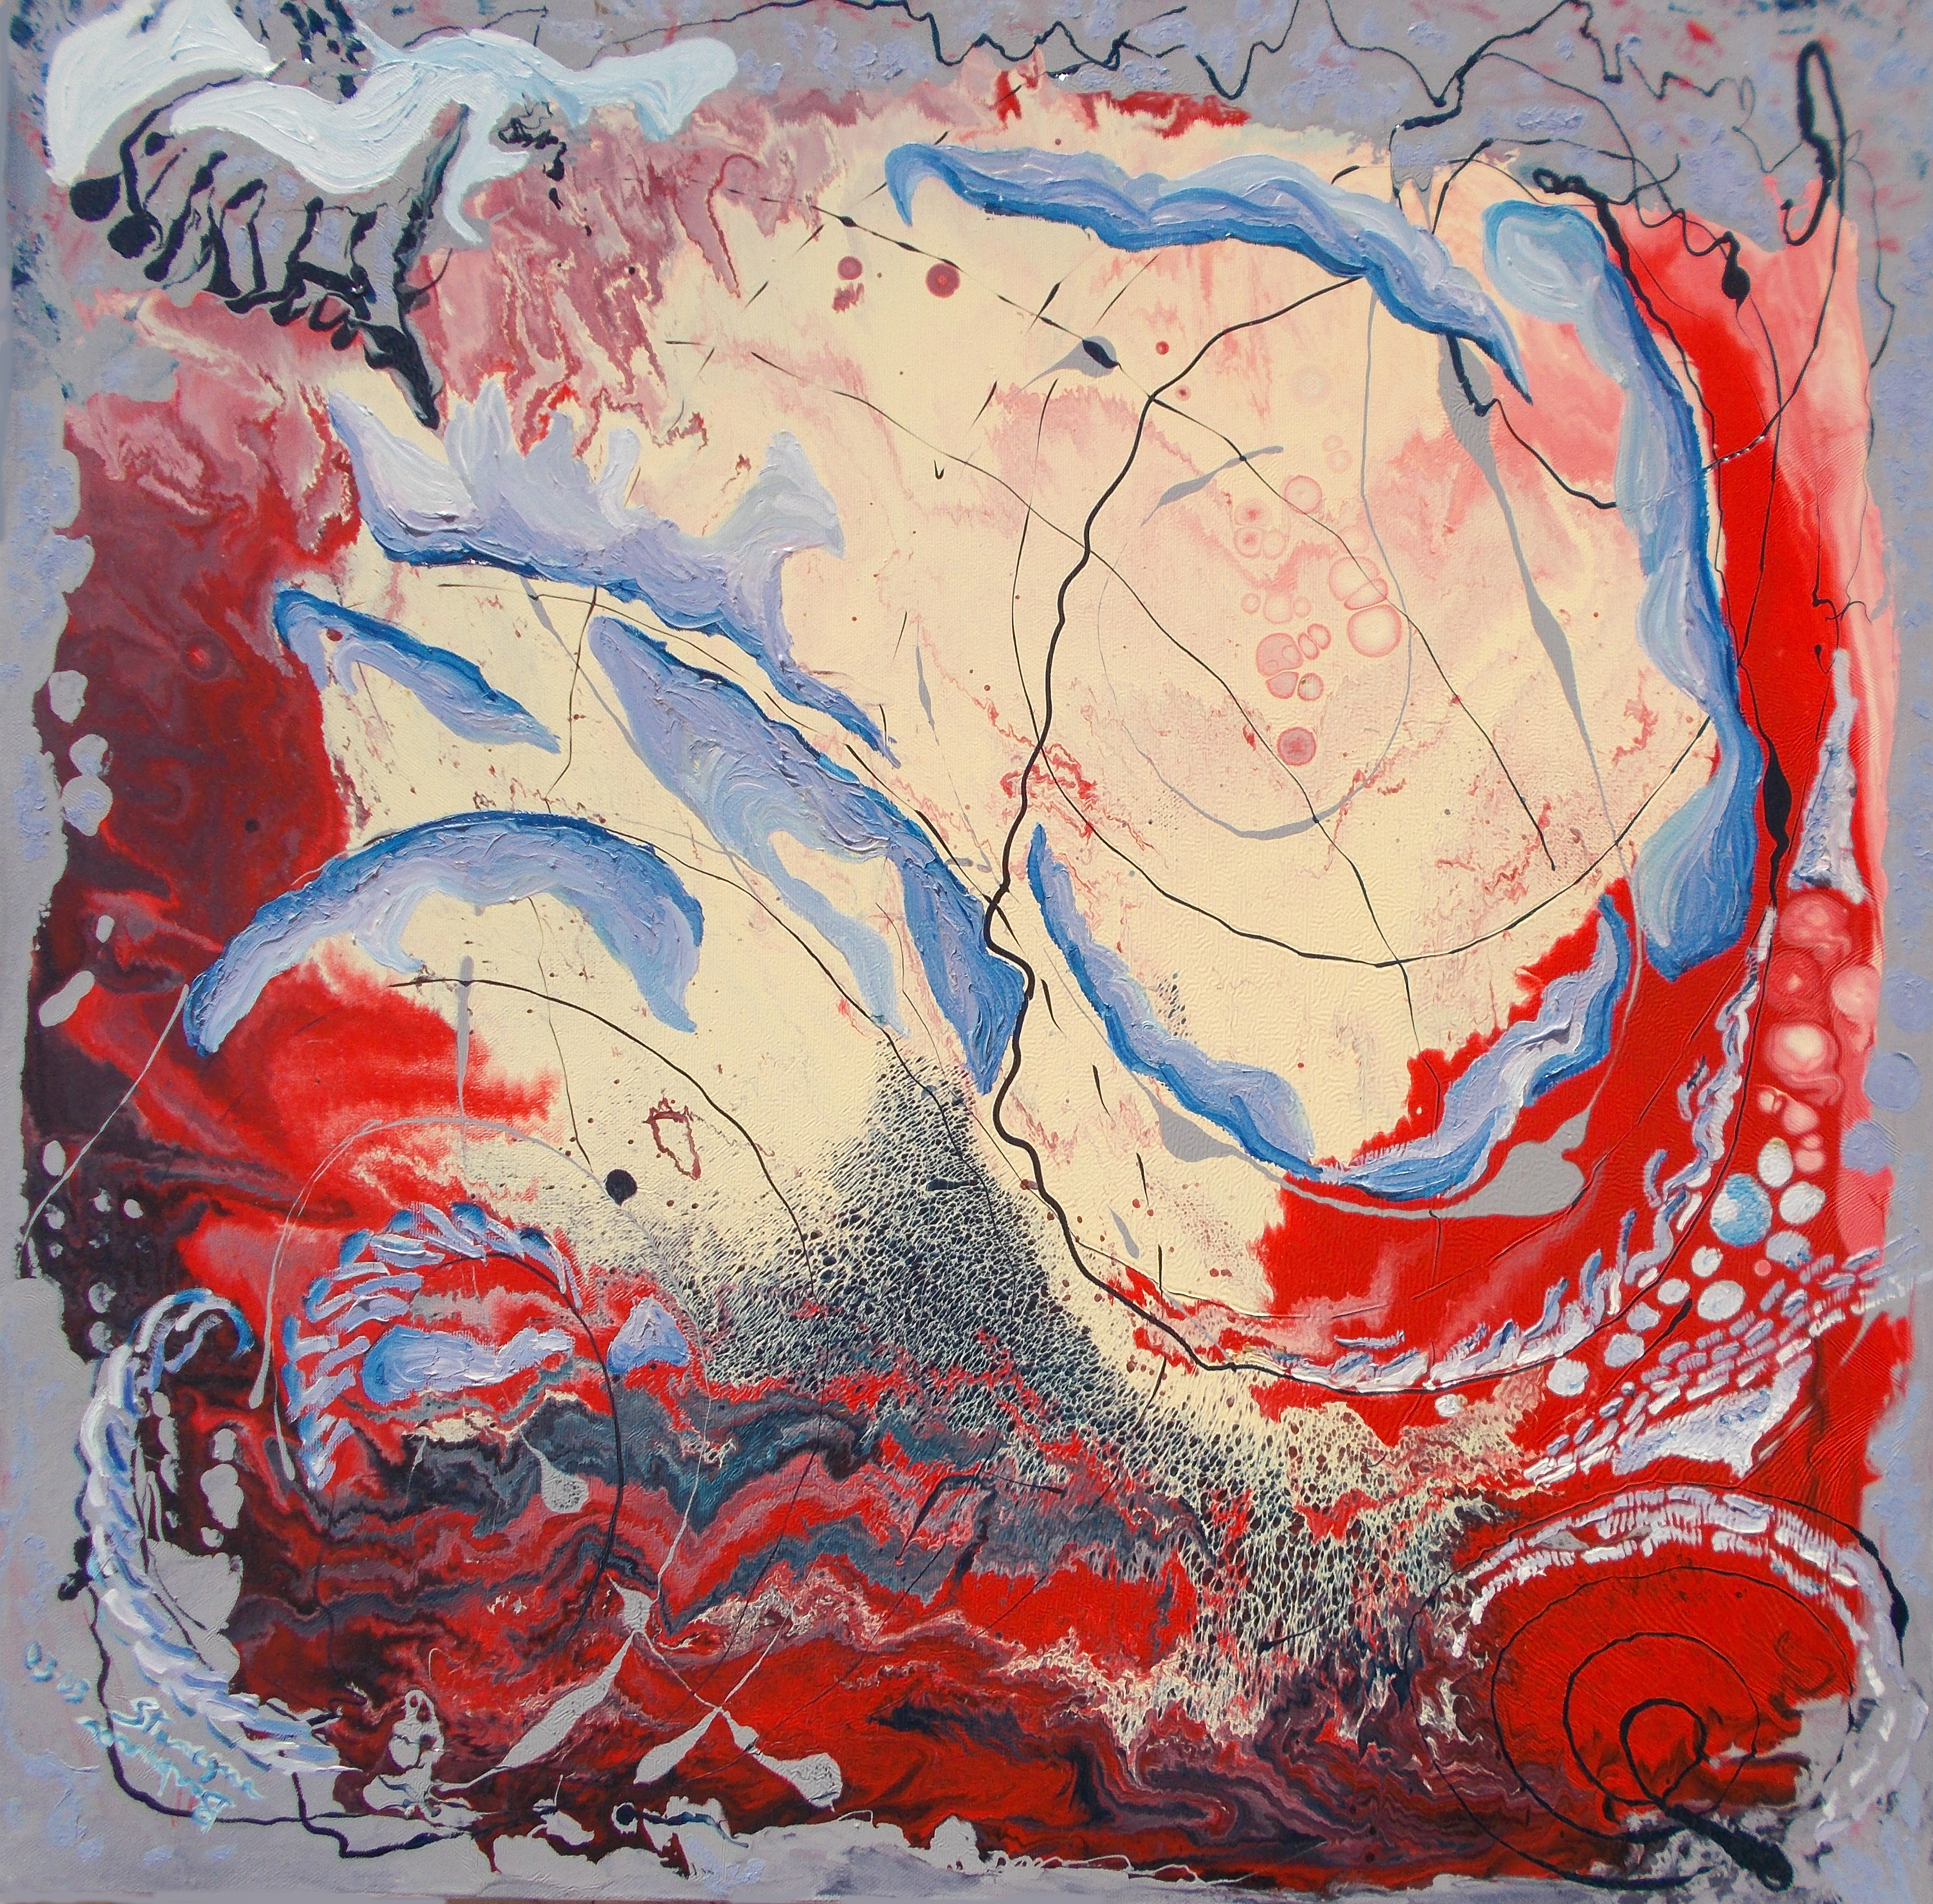 Barbara Stamegna; Movements Of Infinite, 2003, Original Painting Oil, 70 x 70 cm. Artwork description: 241 Violet, light blue, blue, white, fluid floating shapes and lines on violet, red, black, pink, creamy white, enamel background, with nuances and shades.The artwork may have multiple interpretations according to the viewer s perspective and experience of life, so that the viewer becomes himself herself the ...